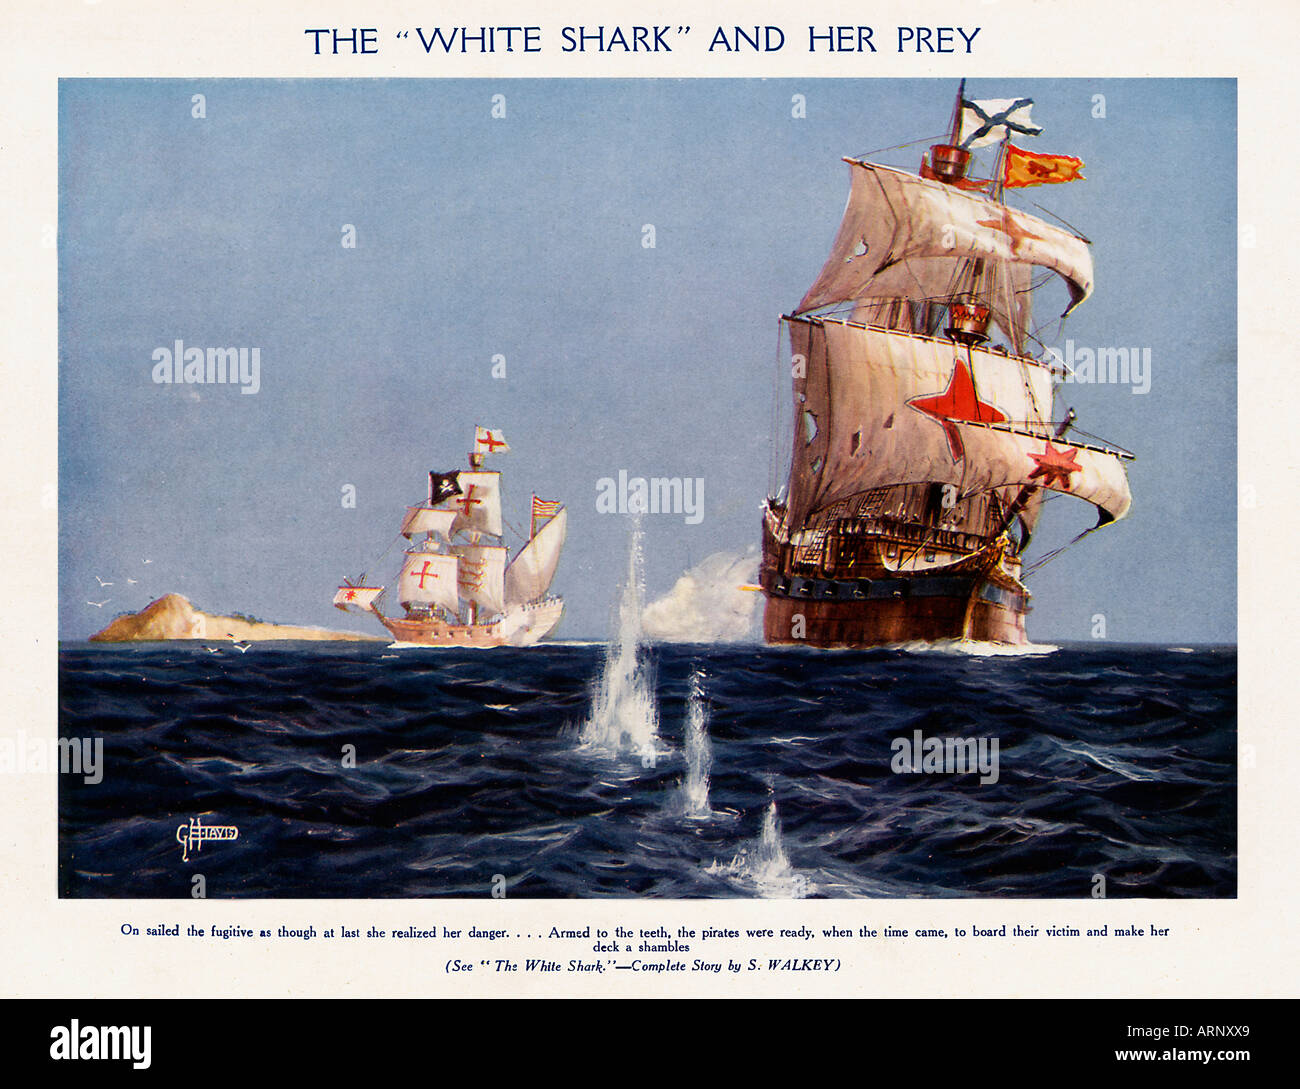 The White Shark And Her Prey 1920s boys comic book illustration of a pirate ship on the attack Stock Photo